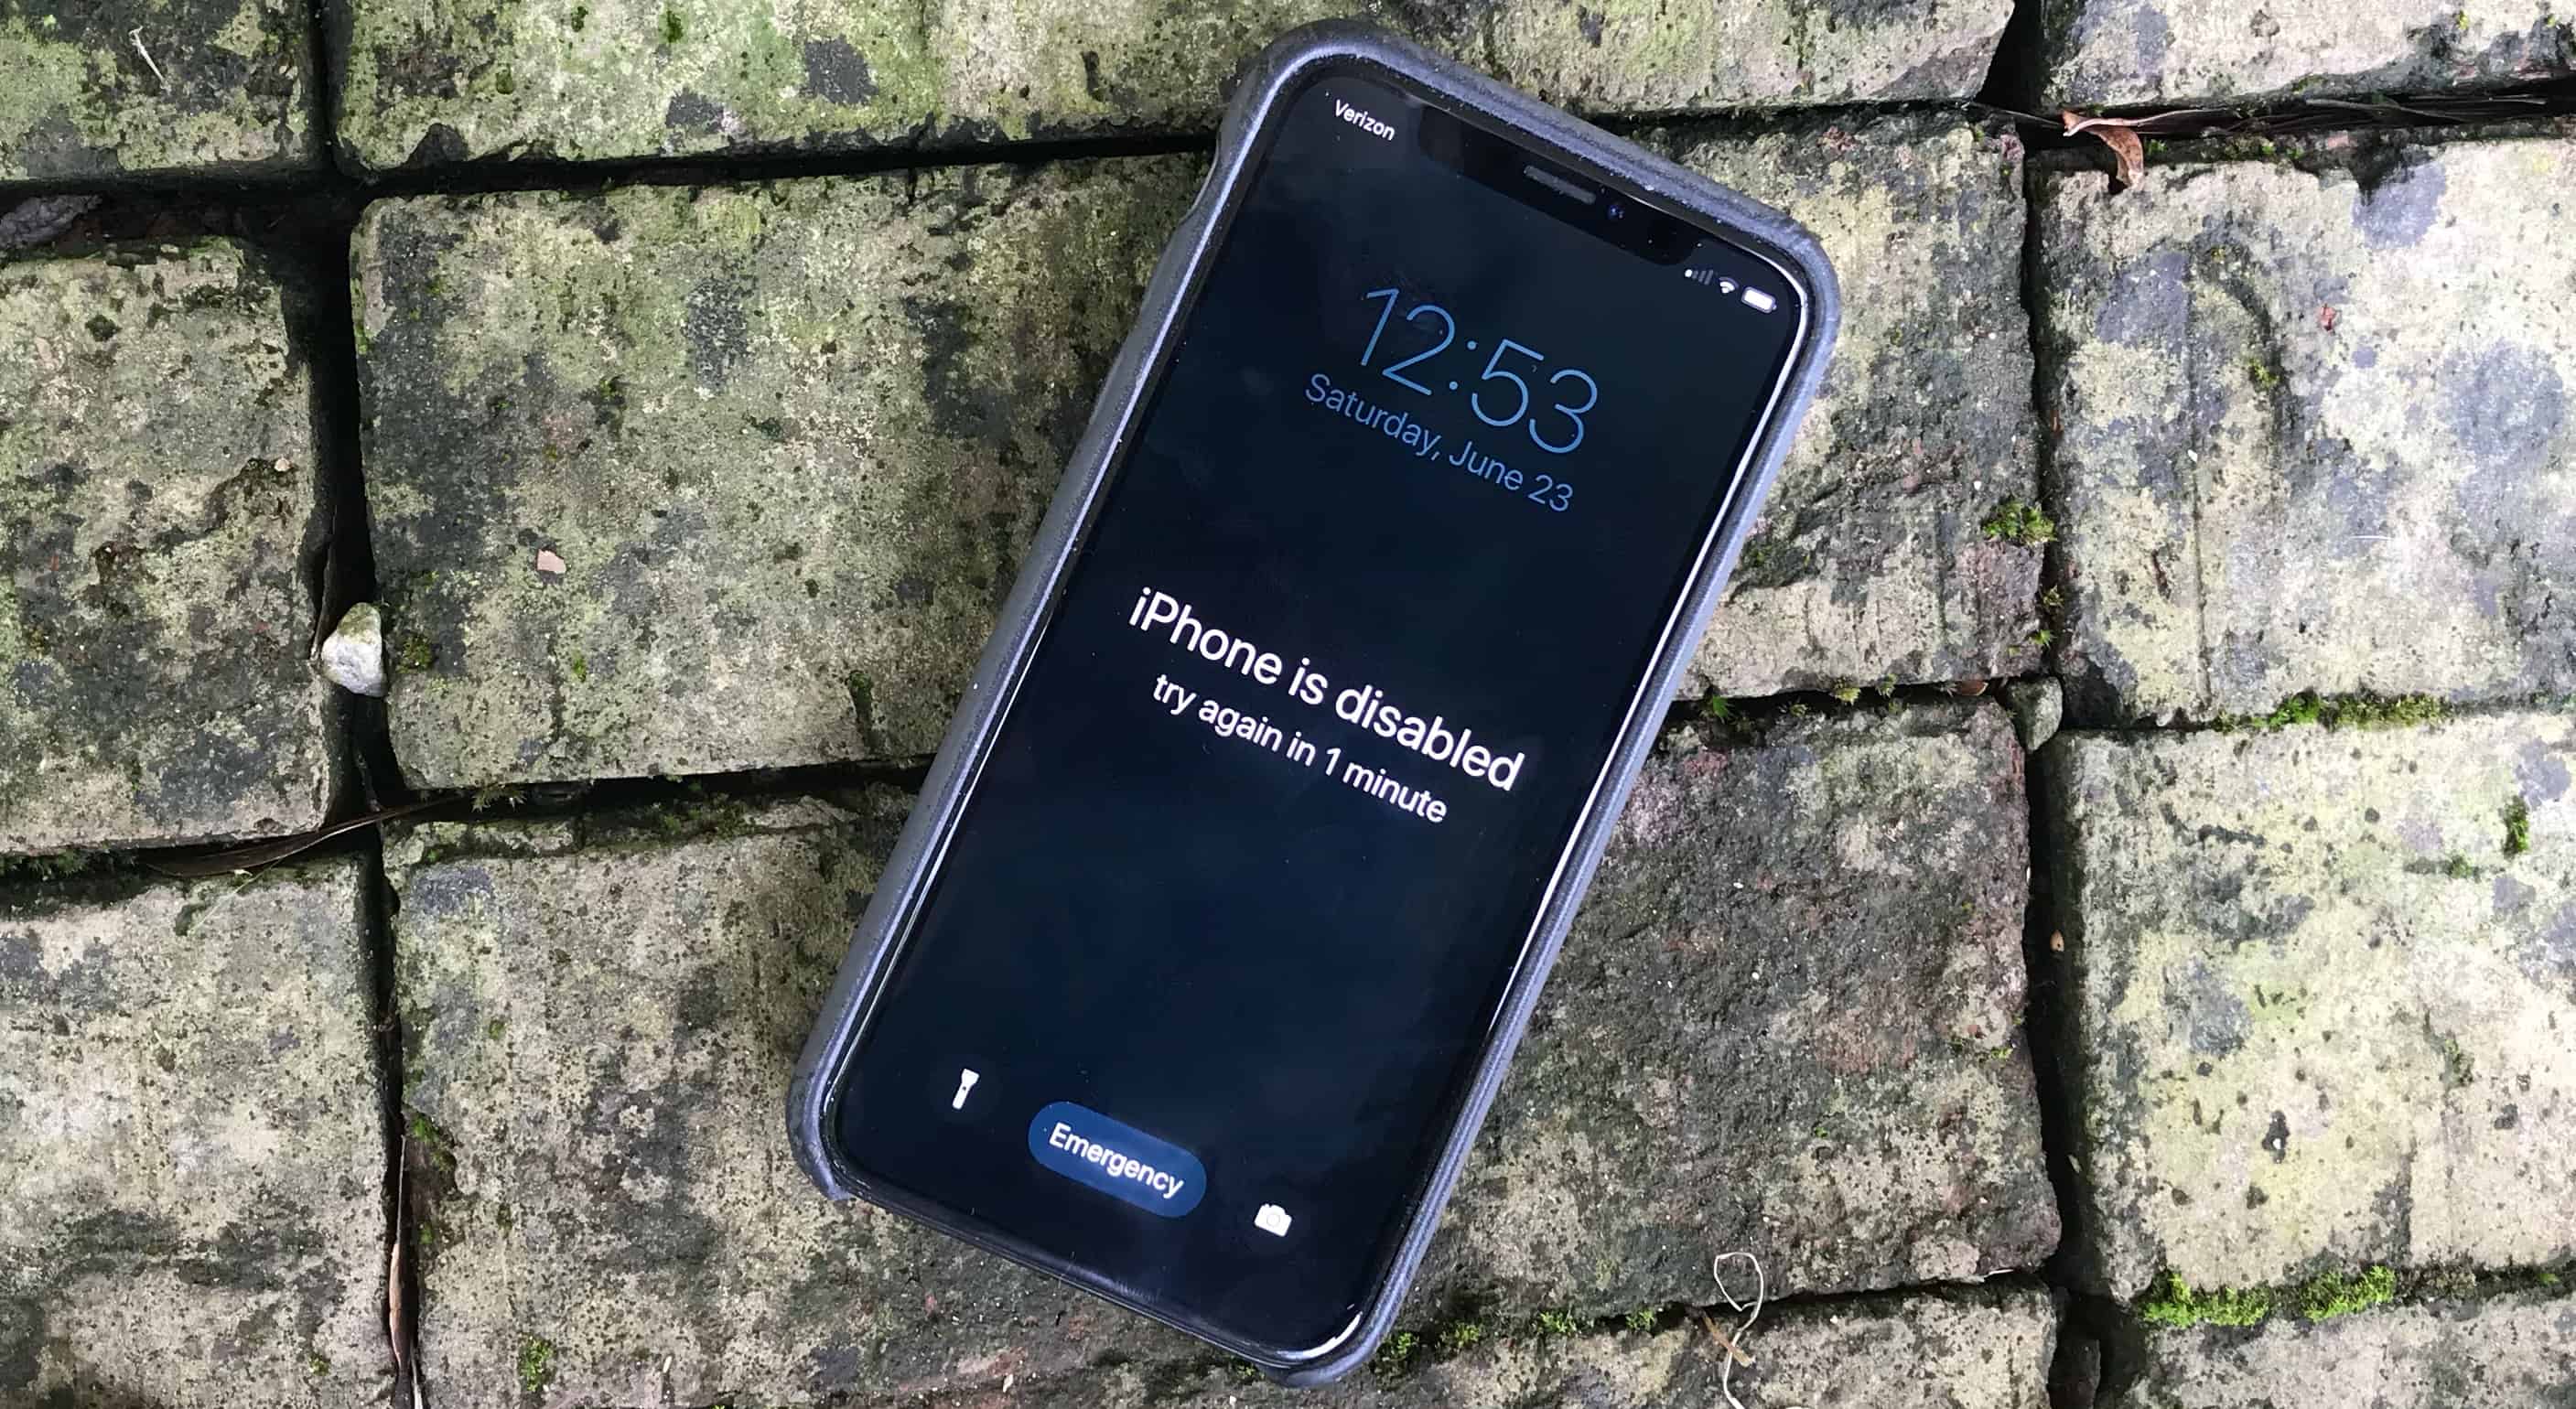 iPhone passcode limit can be bypassed with a keyboard